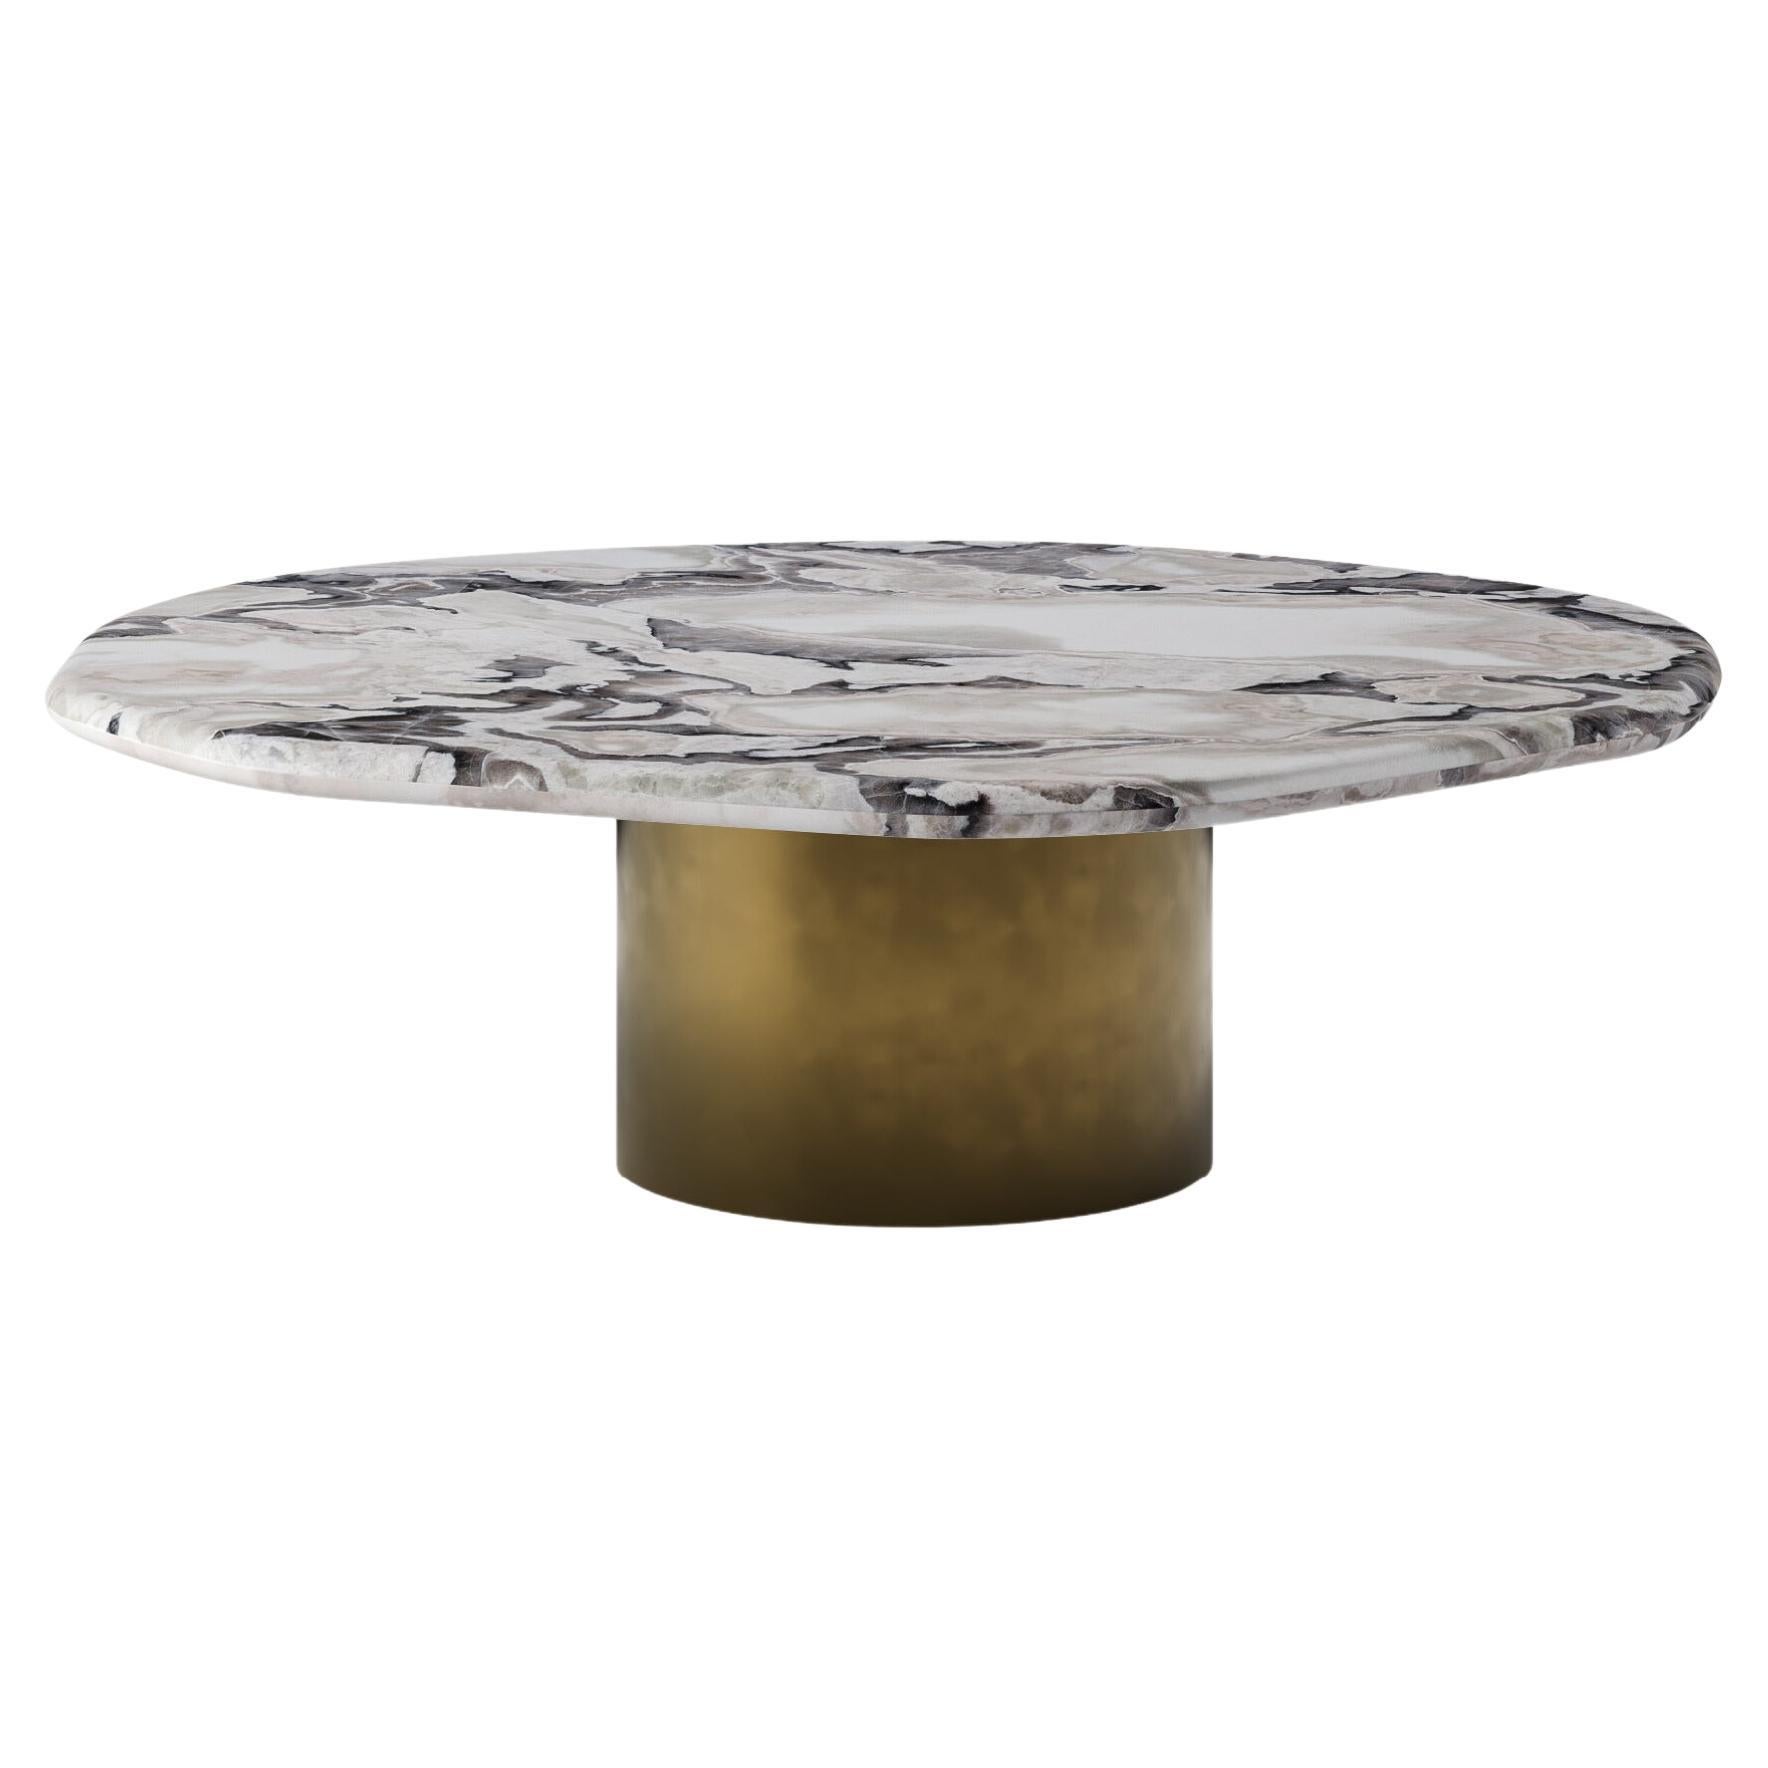 FORM(LA) Lago Round Coffee Table 36”L x 36”W x 14”H Oyster White Marble & Bronze For Sale